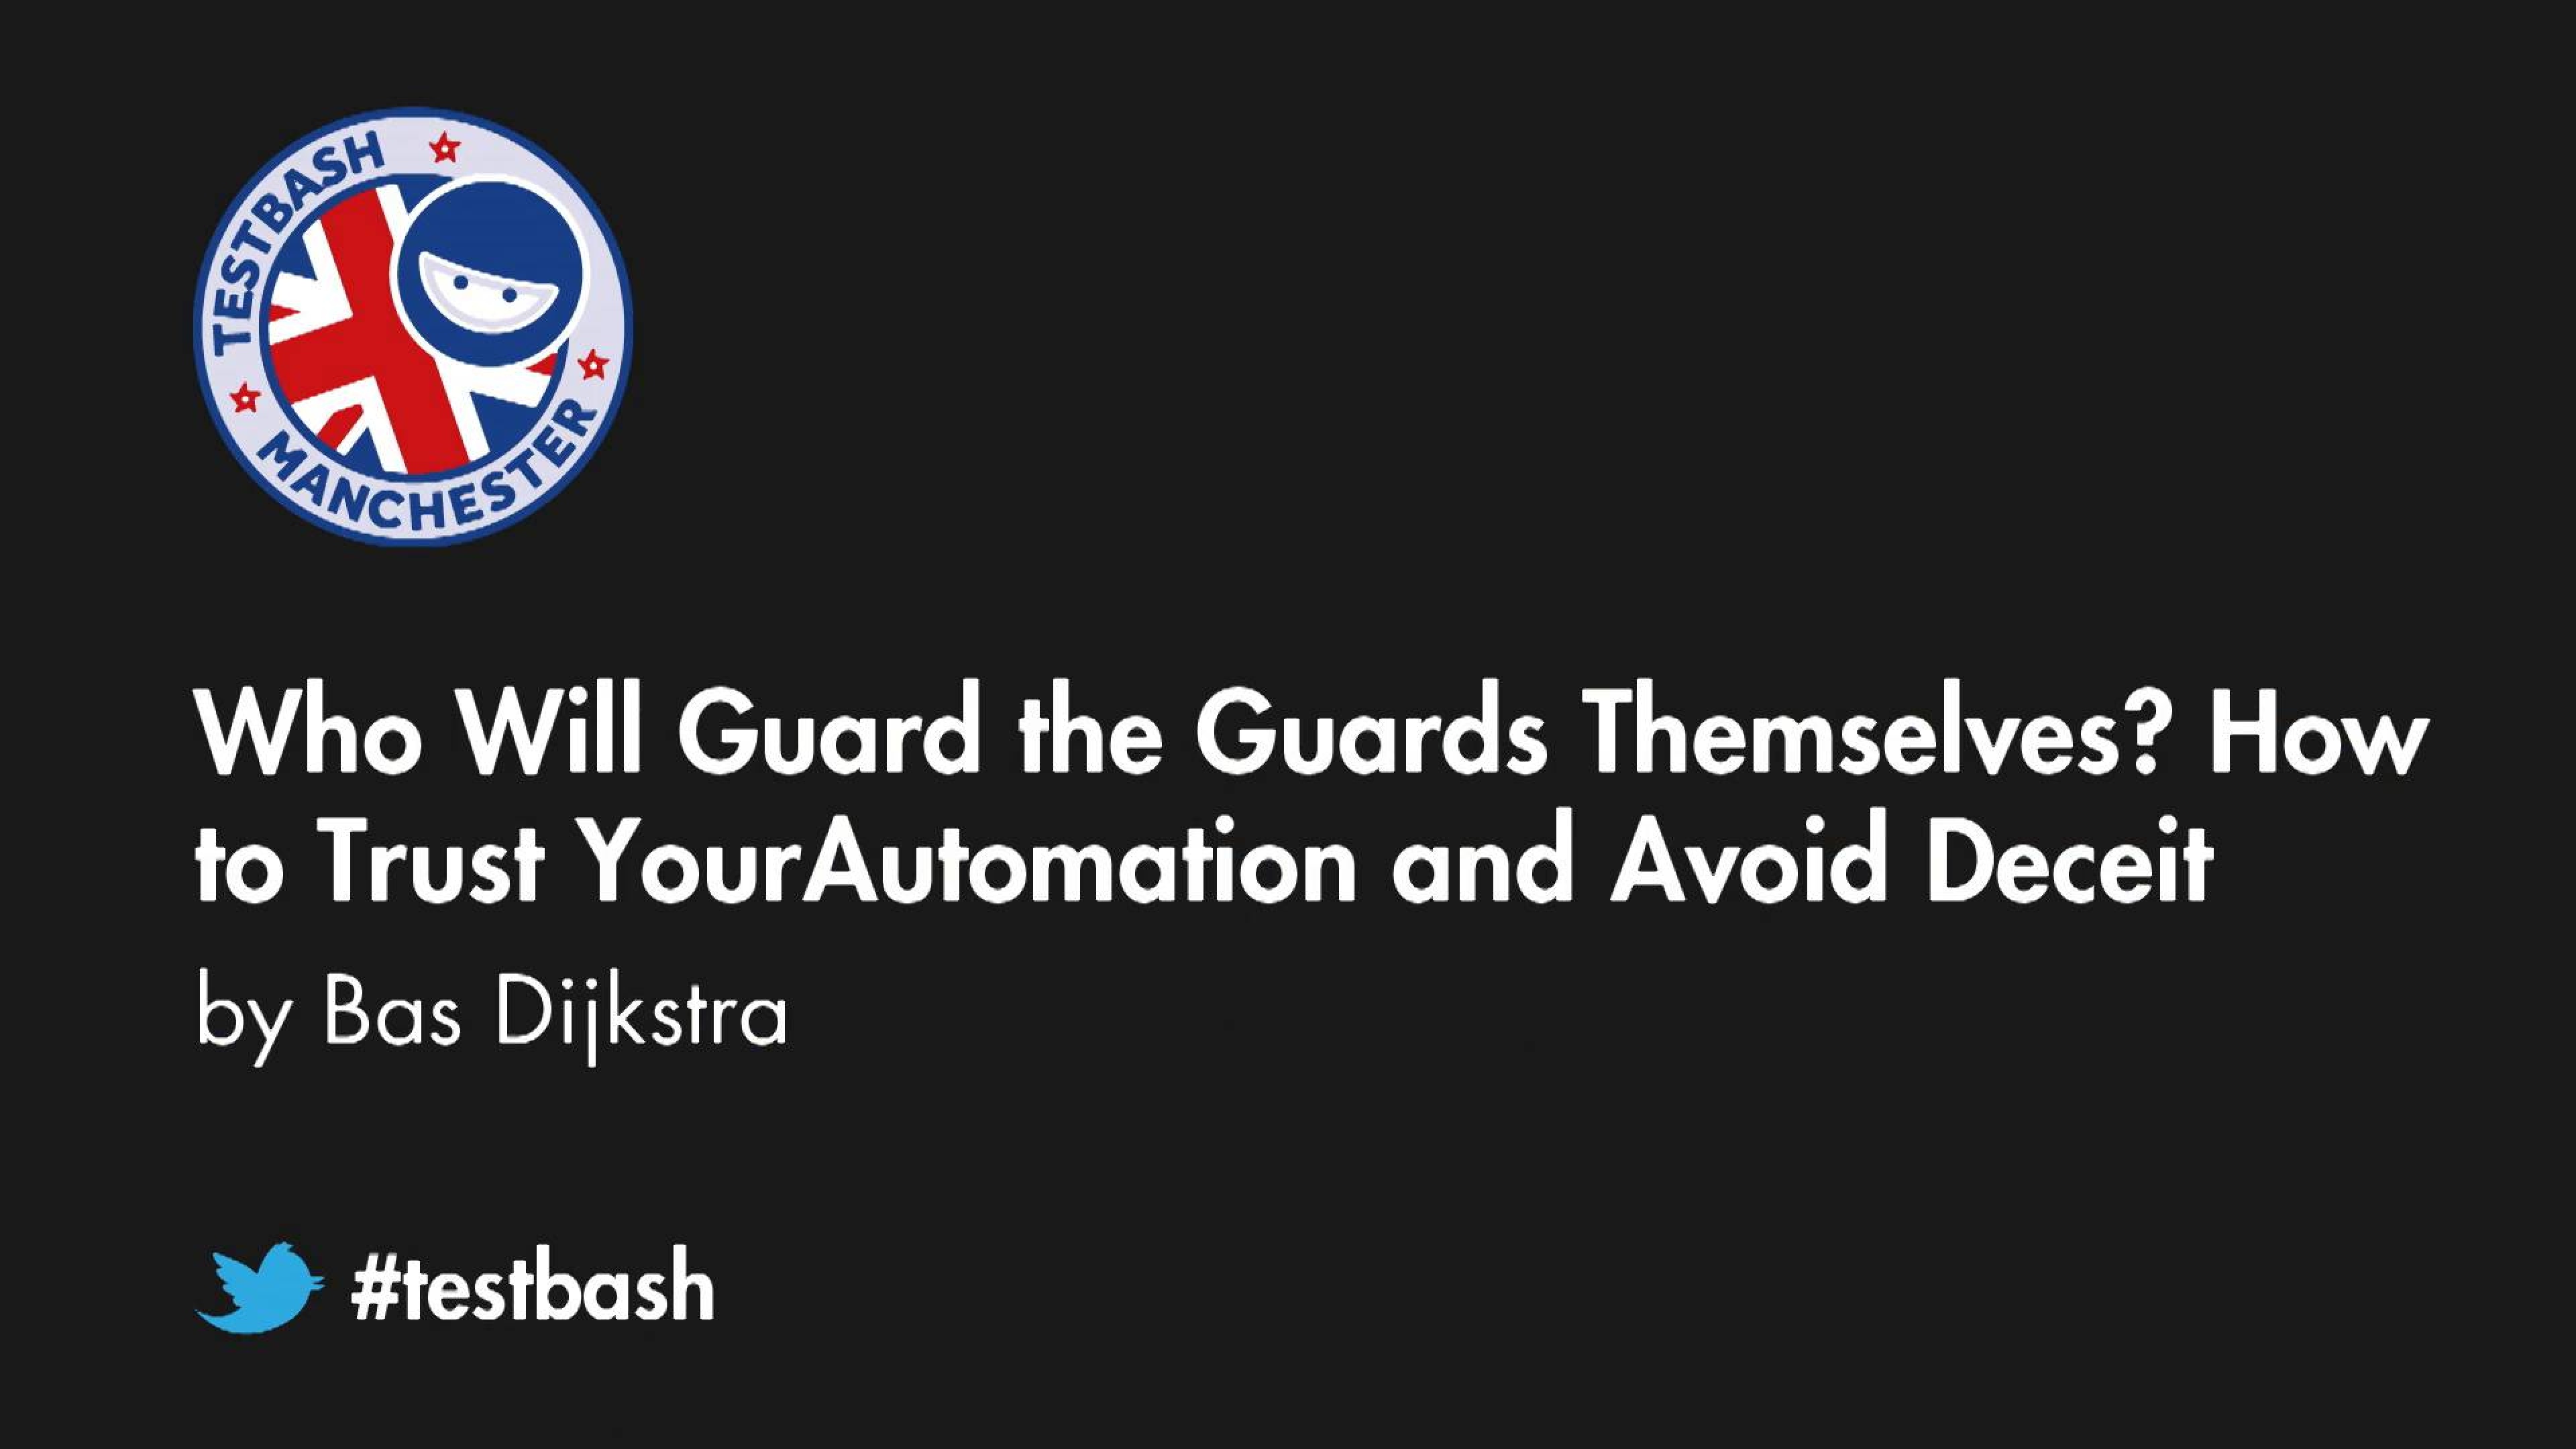 Who Will Guard the Guards Themselves? How to Trust Your Automation and Avoid Deceit - Bas Dijkstra